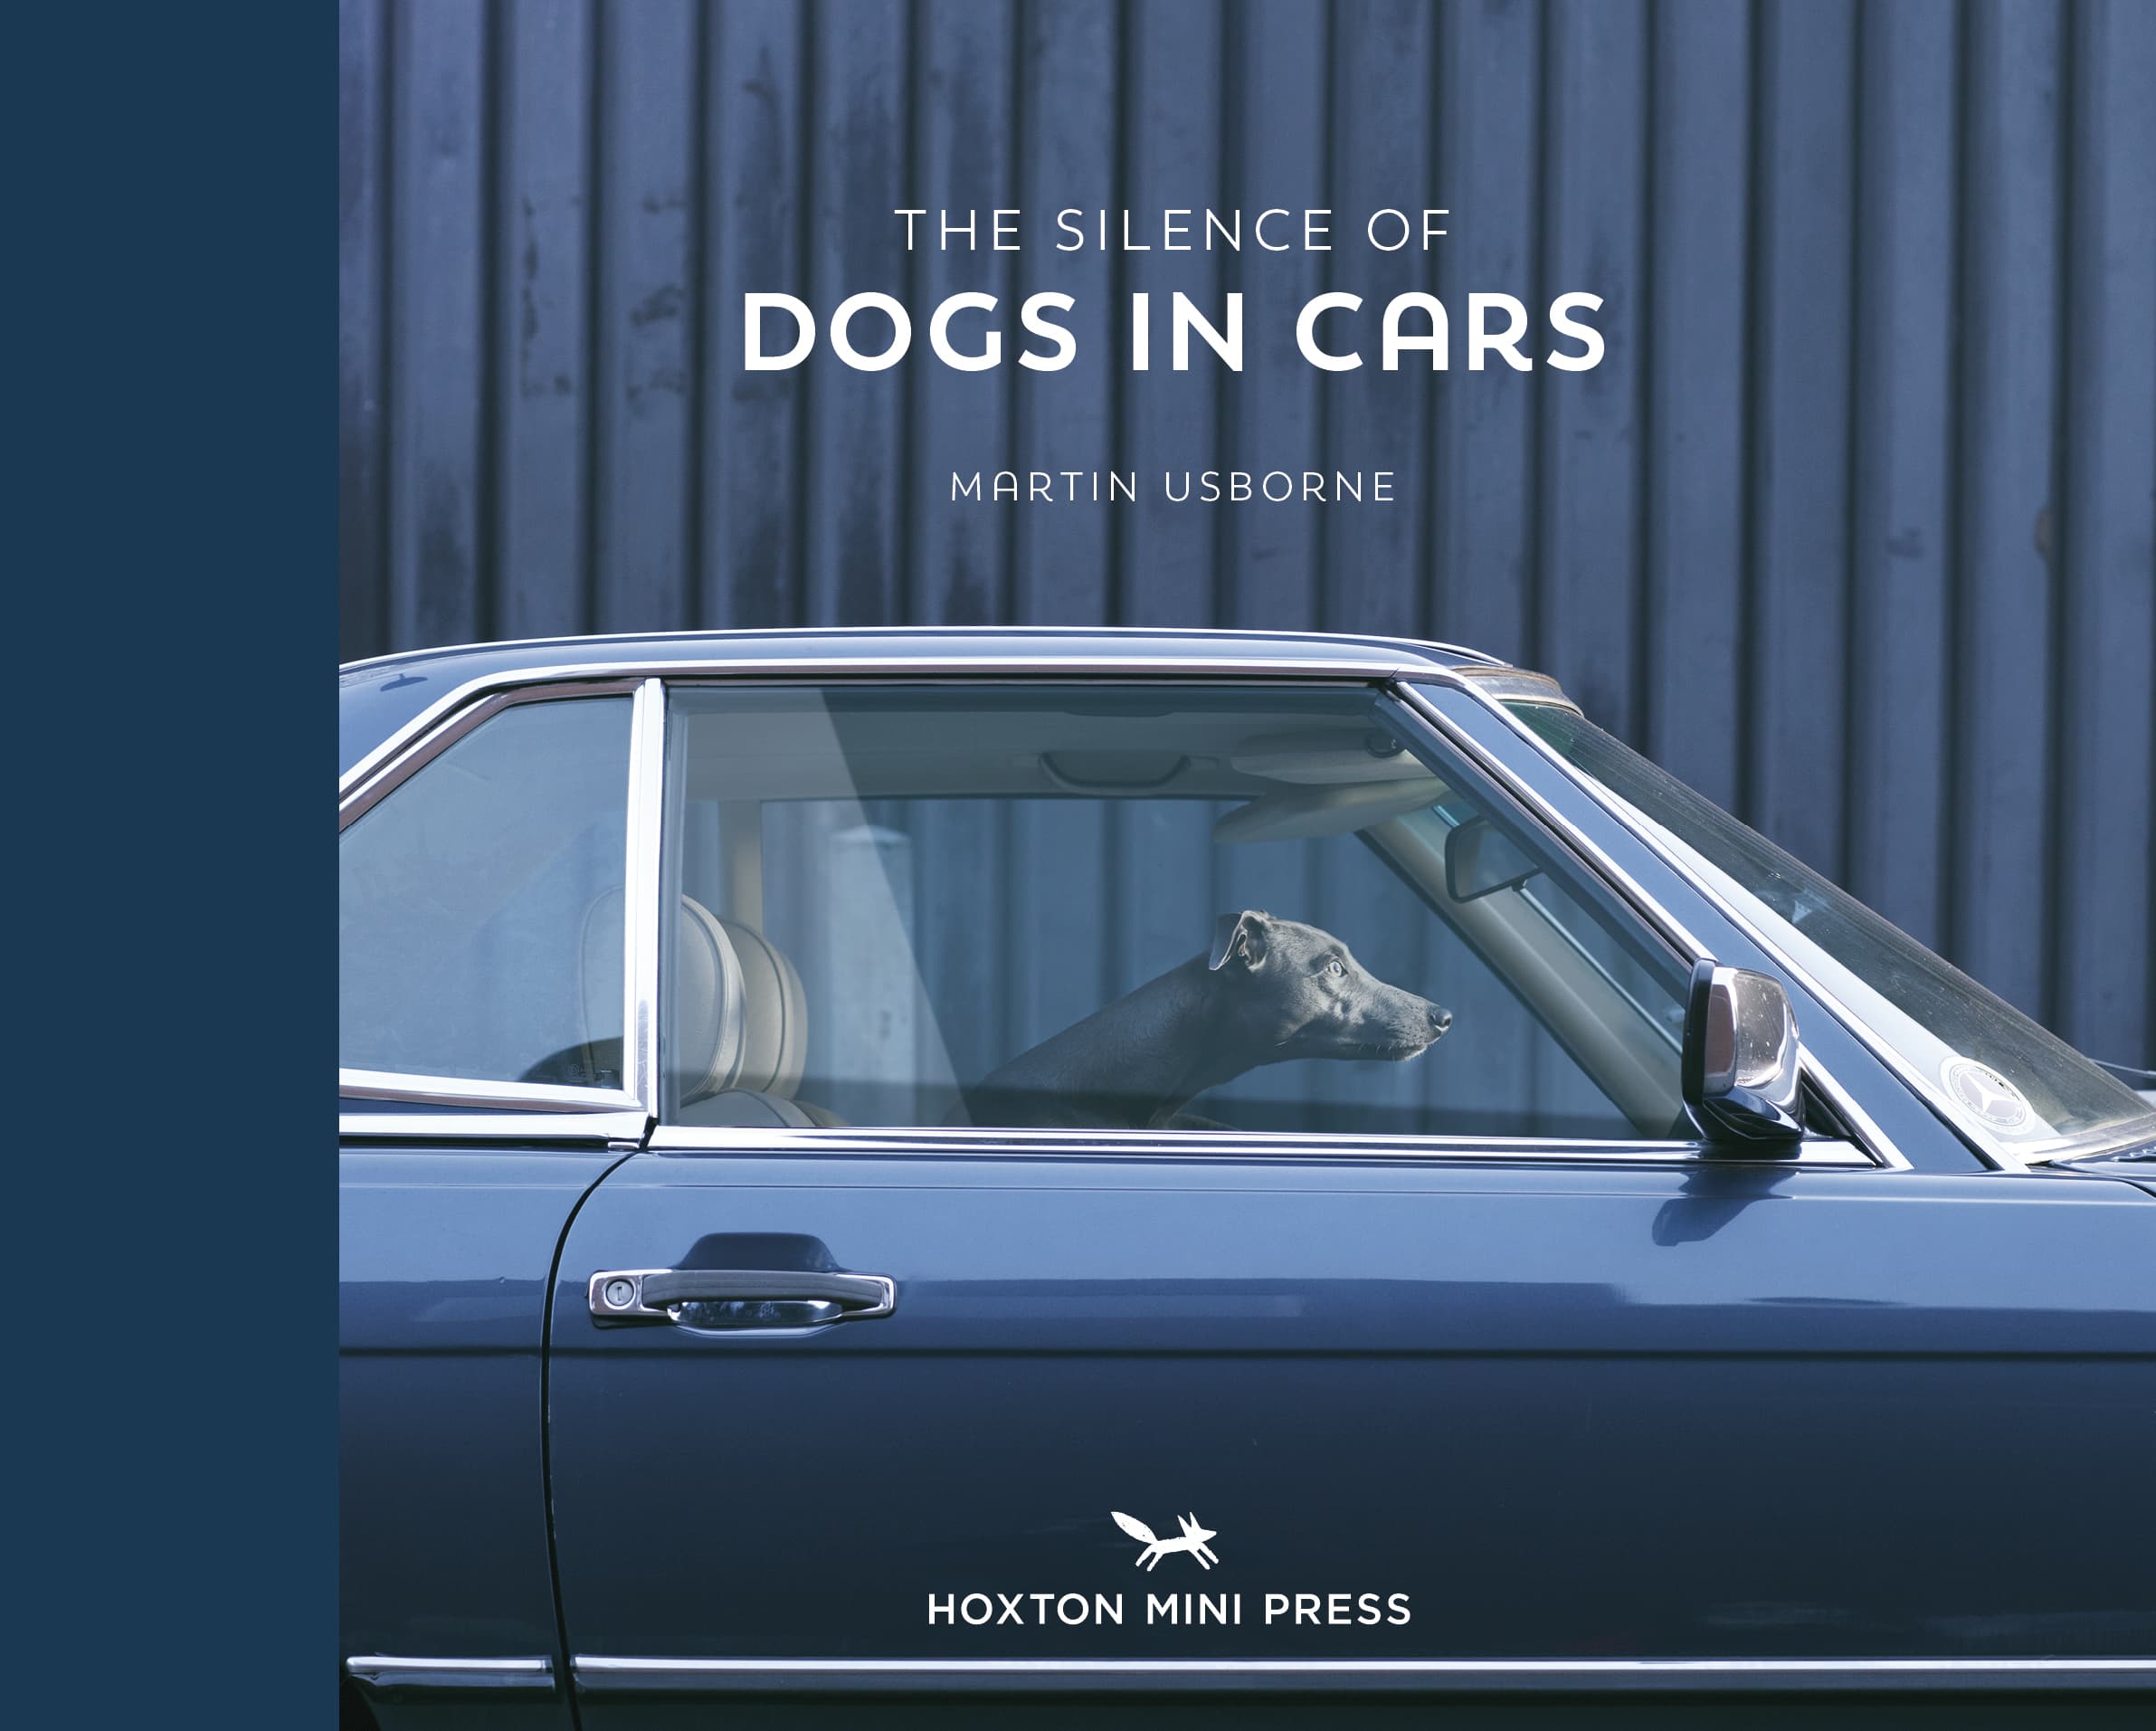 Dogs in Cars by Martin Usborne